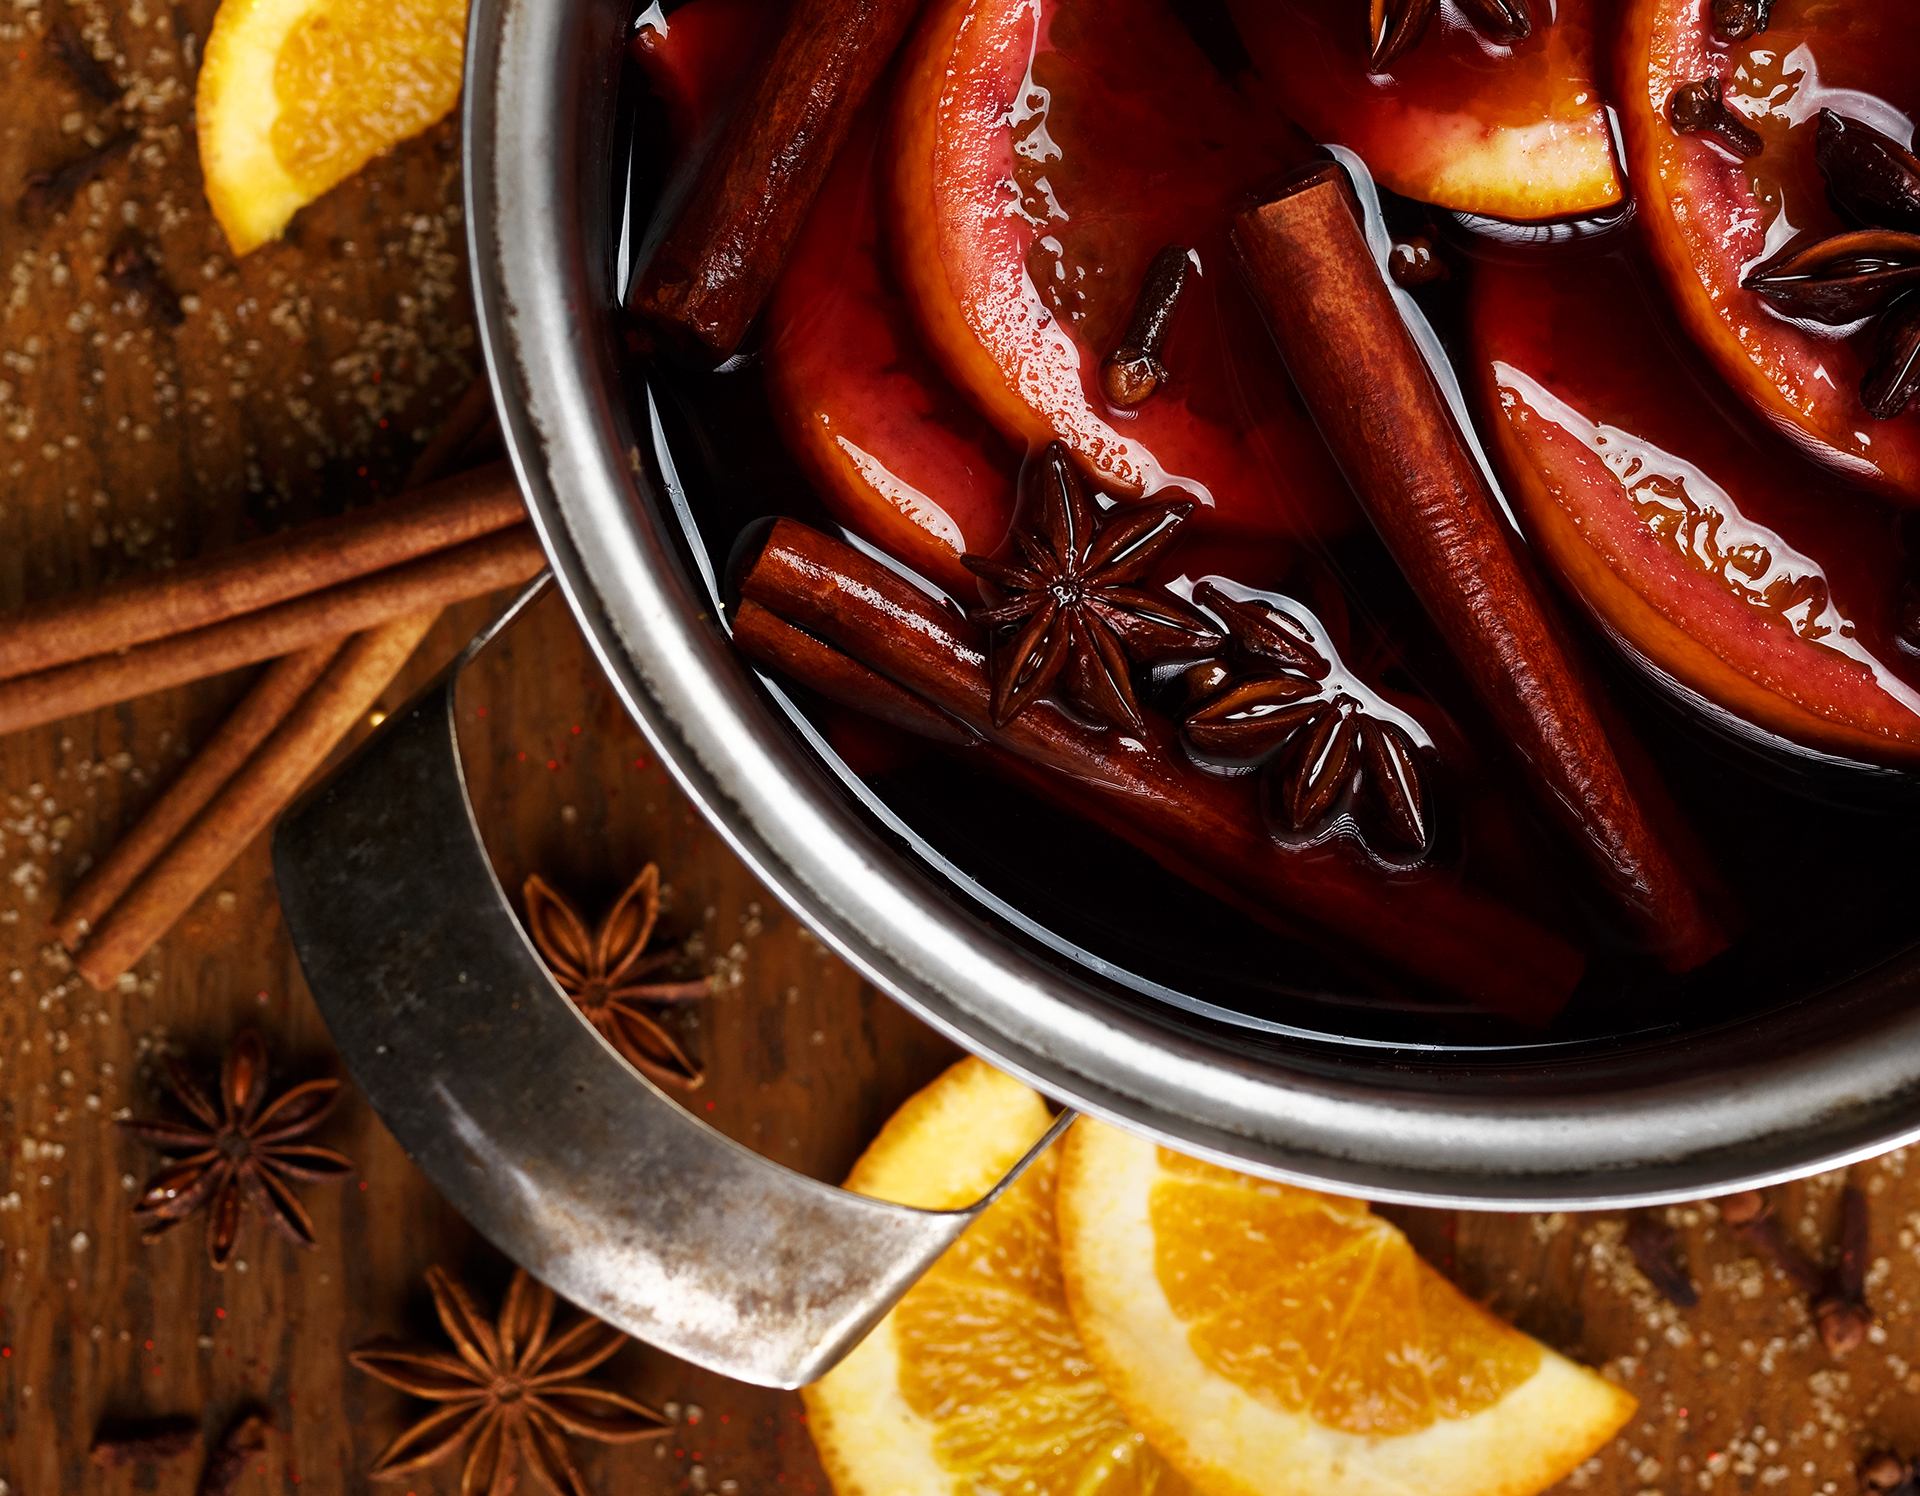 Potpourri mix of orange slices, cloves, star anise, and cinnamon sticks simmering in a pot